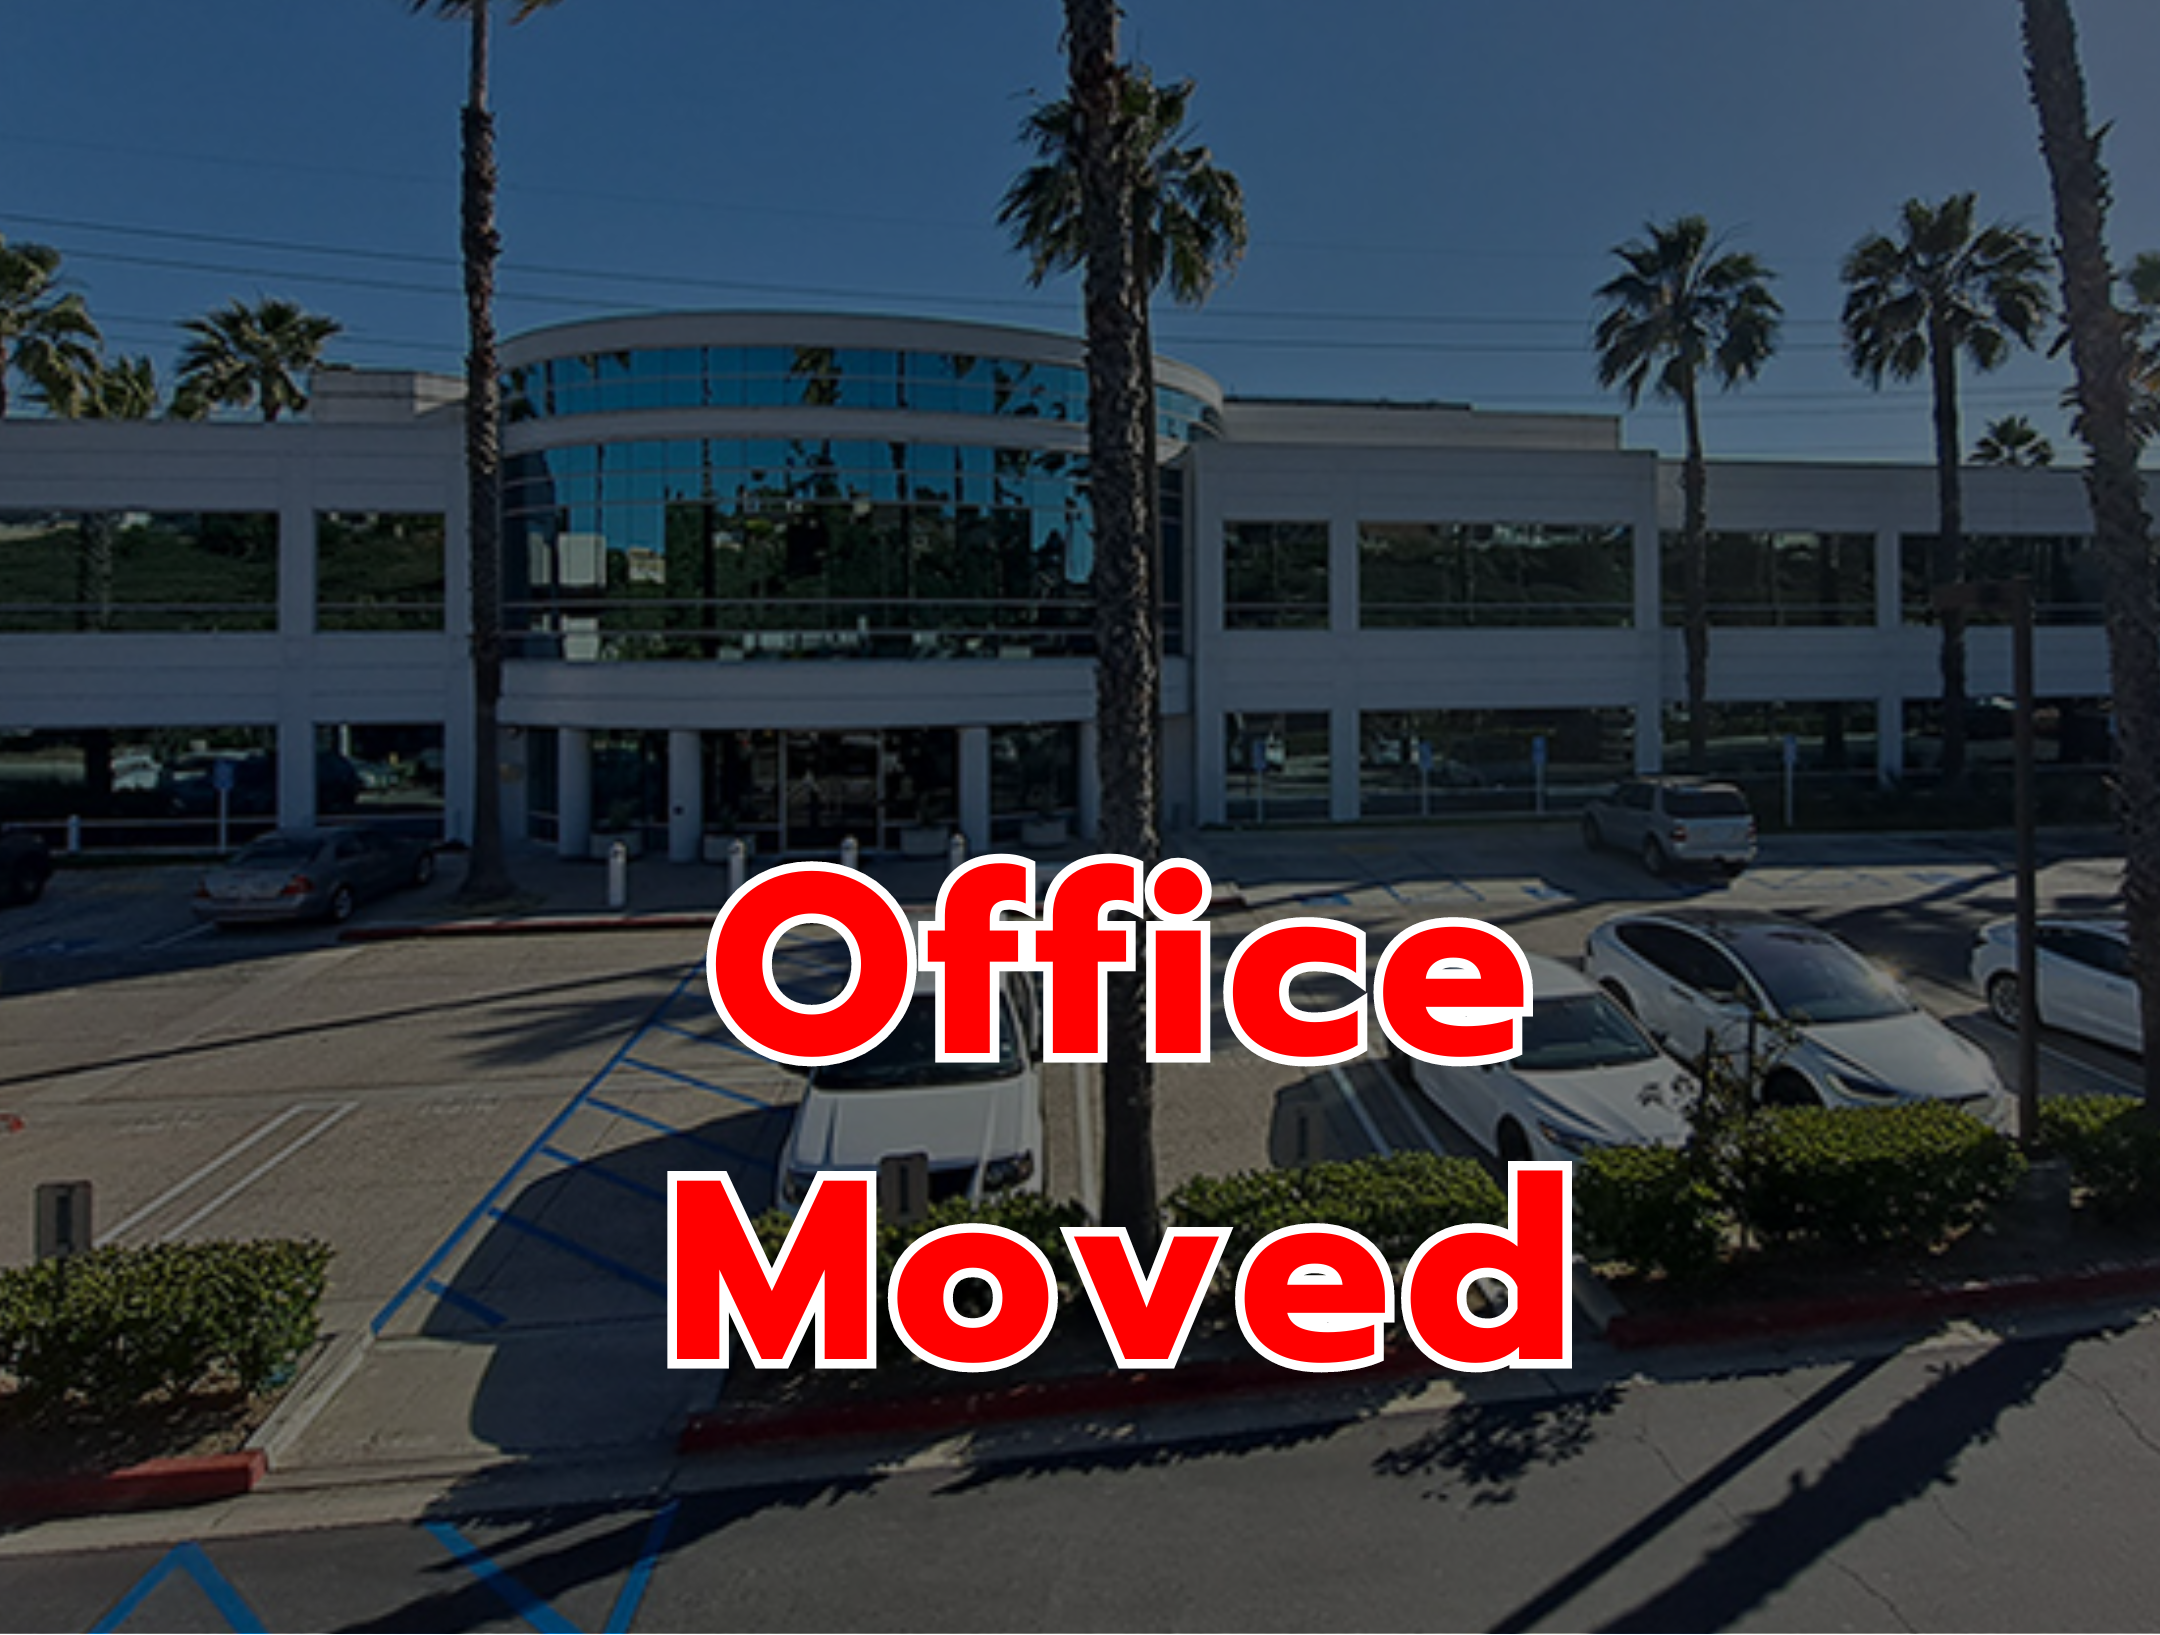 Mission Viejo Office has moved